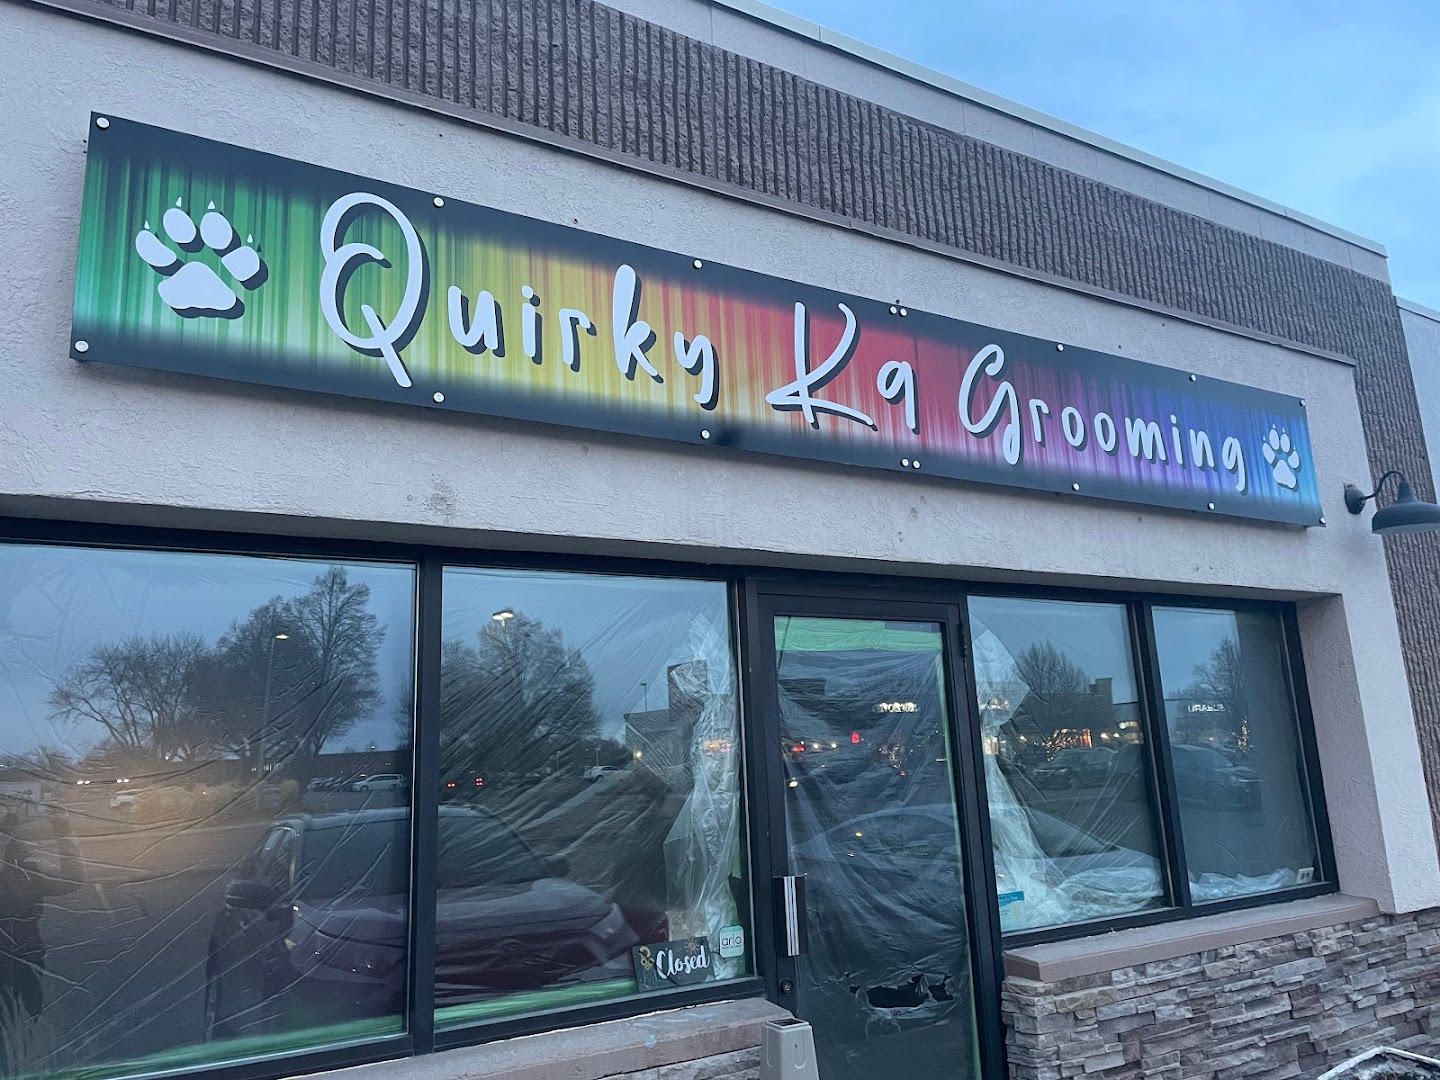 Quirky K9 Grooming, LLC